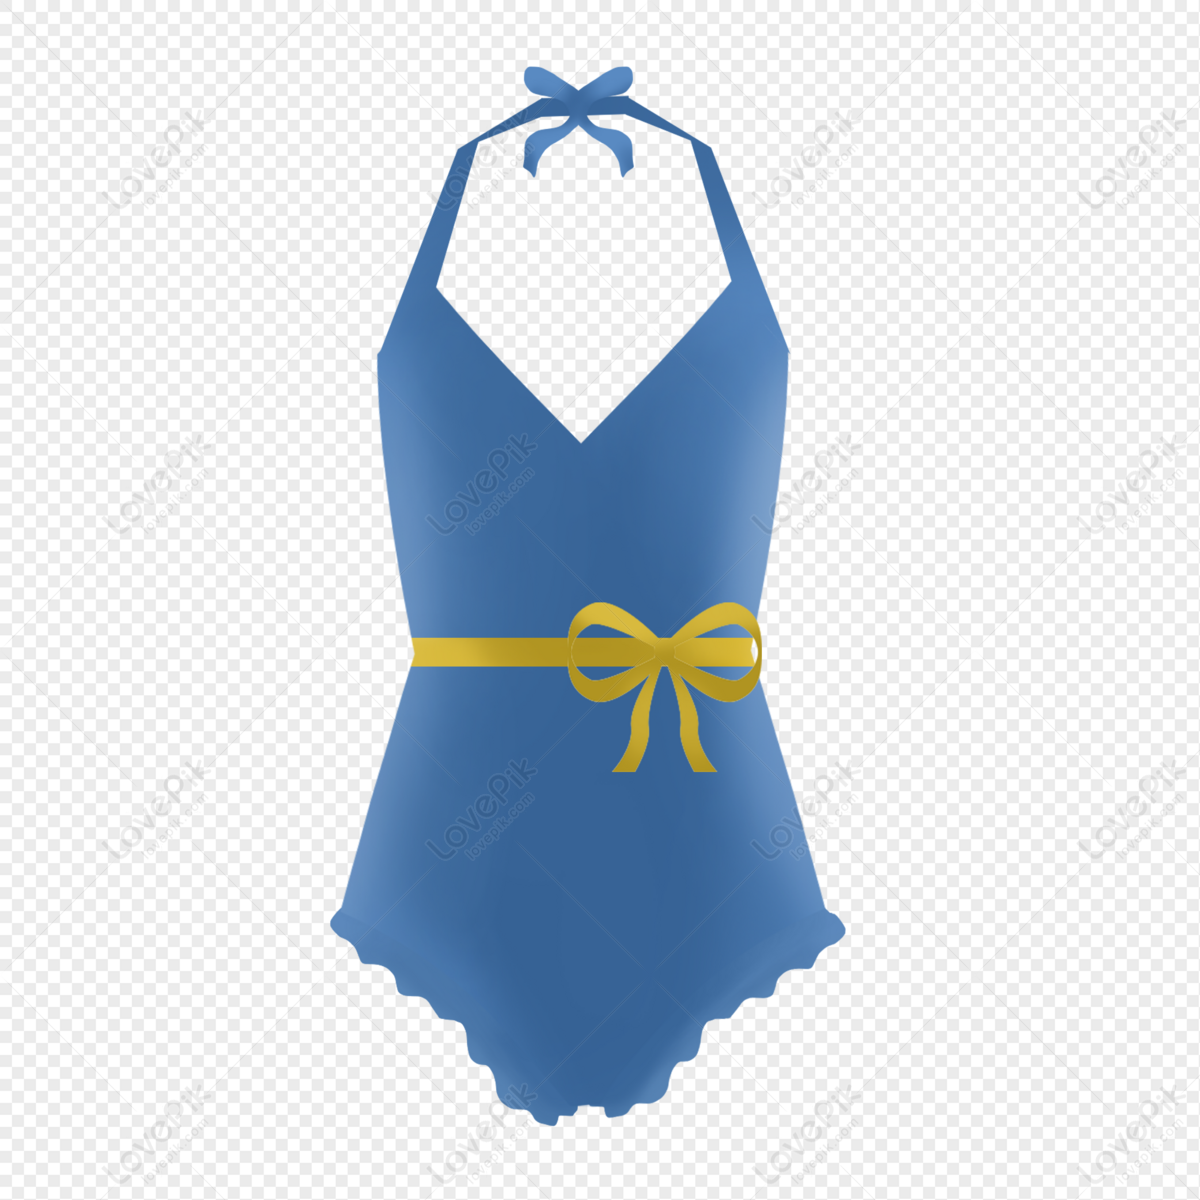 Bathing Suit Illustration Images | Free Photos, PNG Stickers, Wallpapers &  Backgrounds - rawpixel